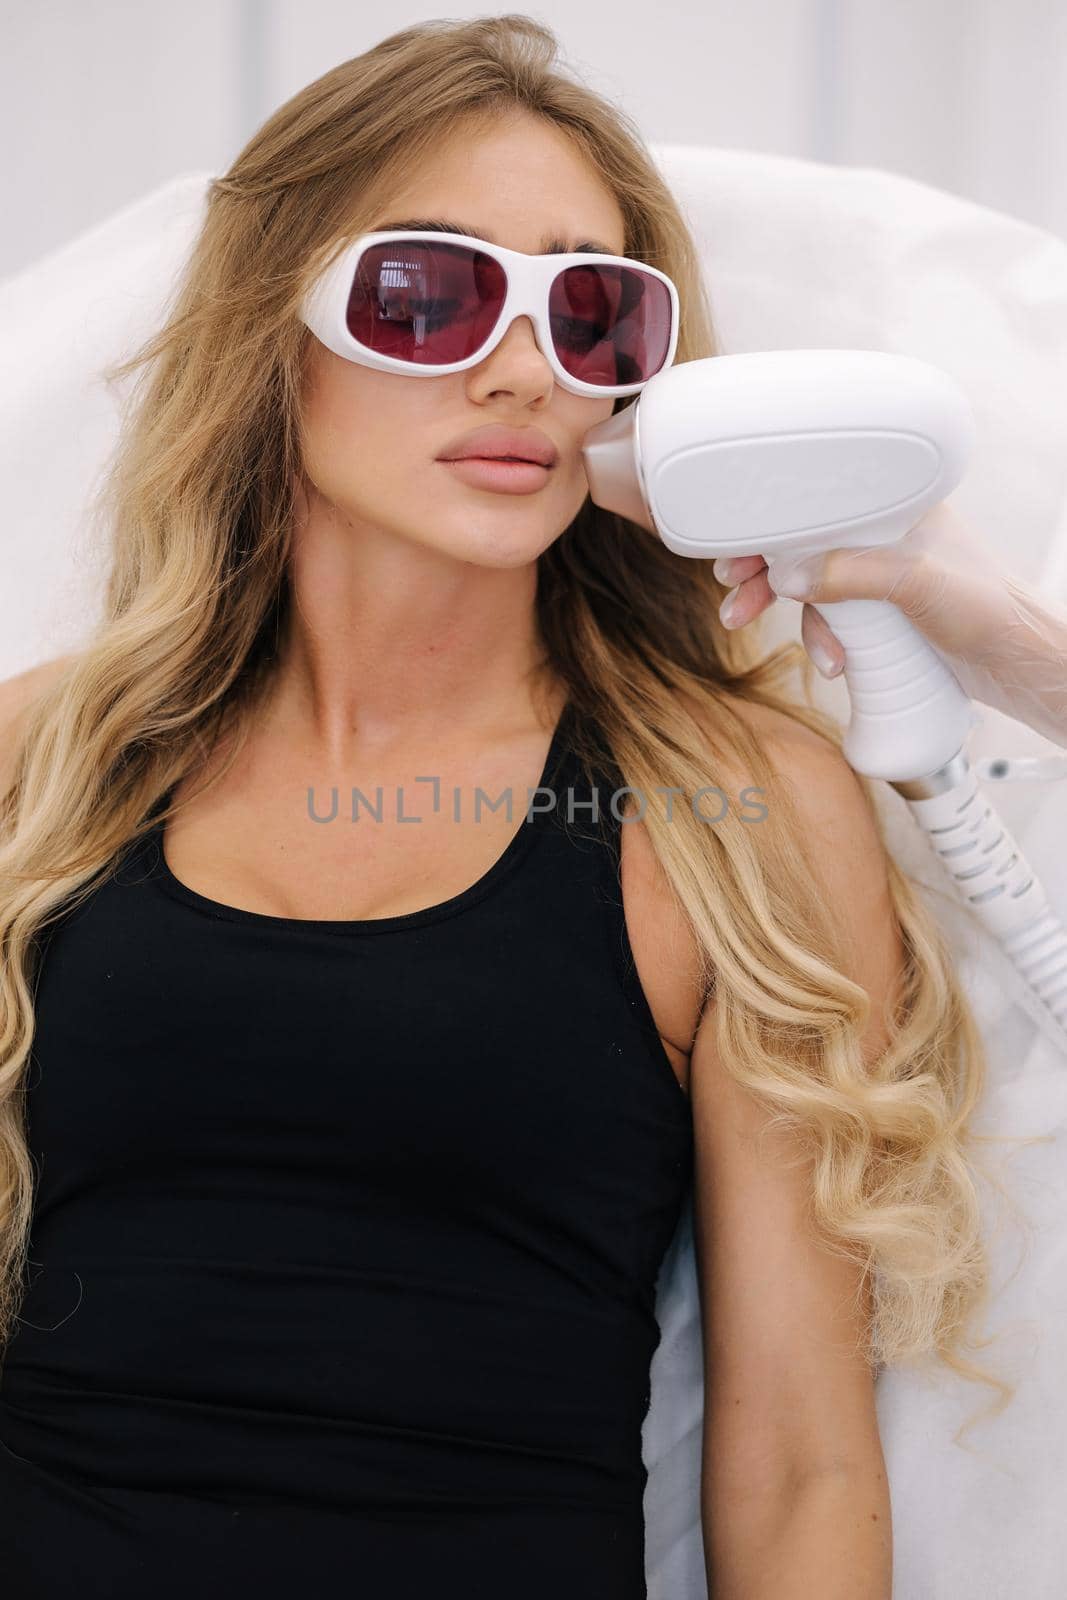 Beautician doing epilation on the face of a beautiful woman in beauty center. Female receiving laser light hair removal treatment for hairless smooth skin at cosmetology salon.